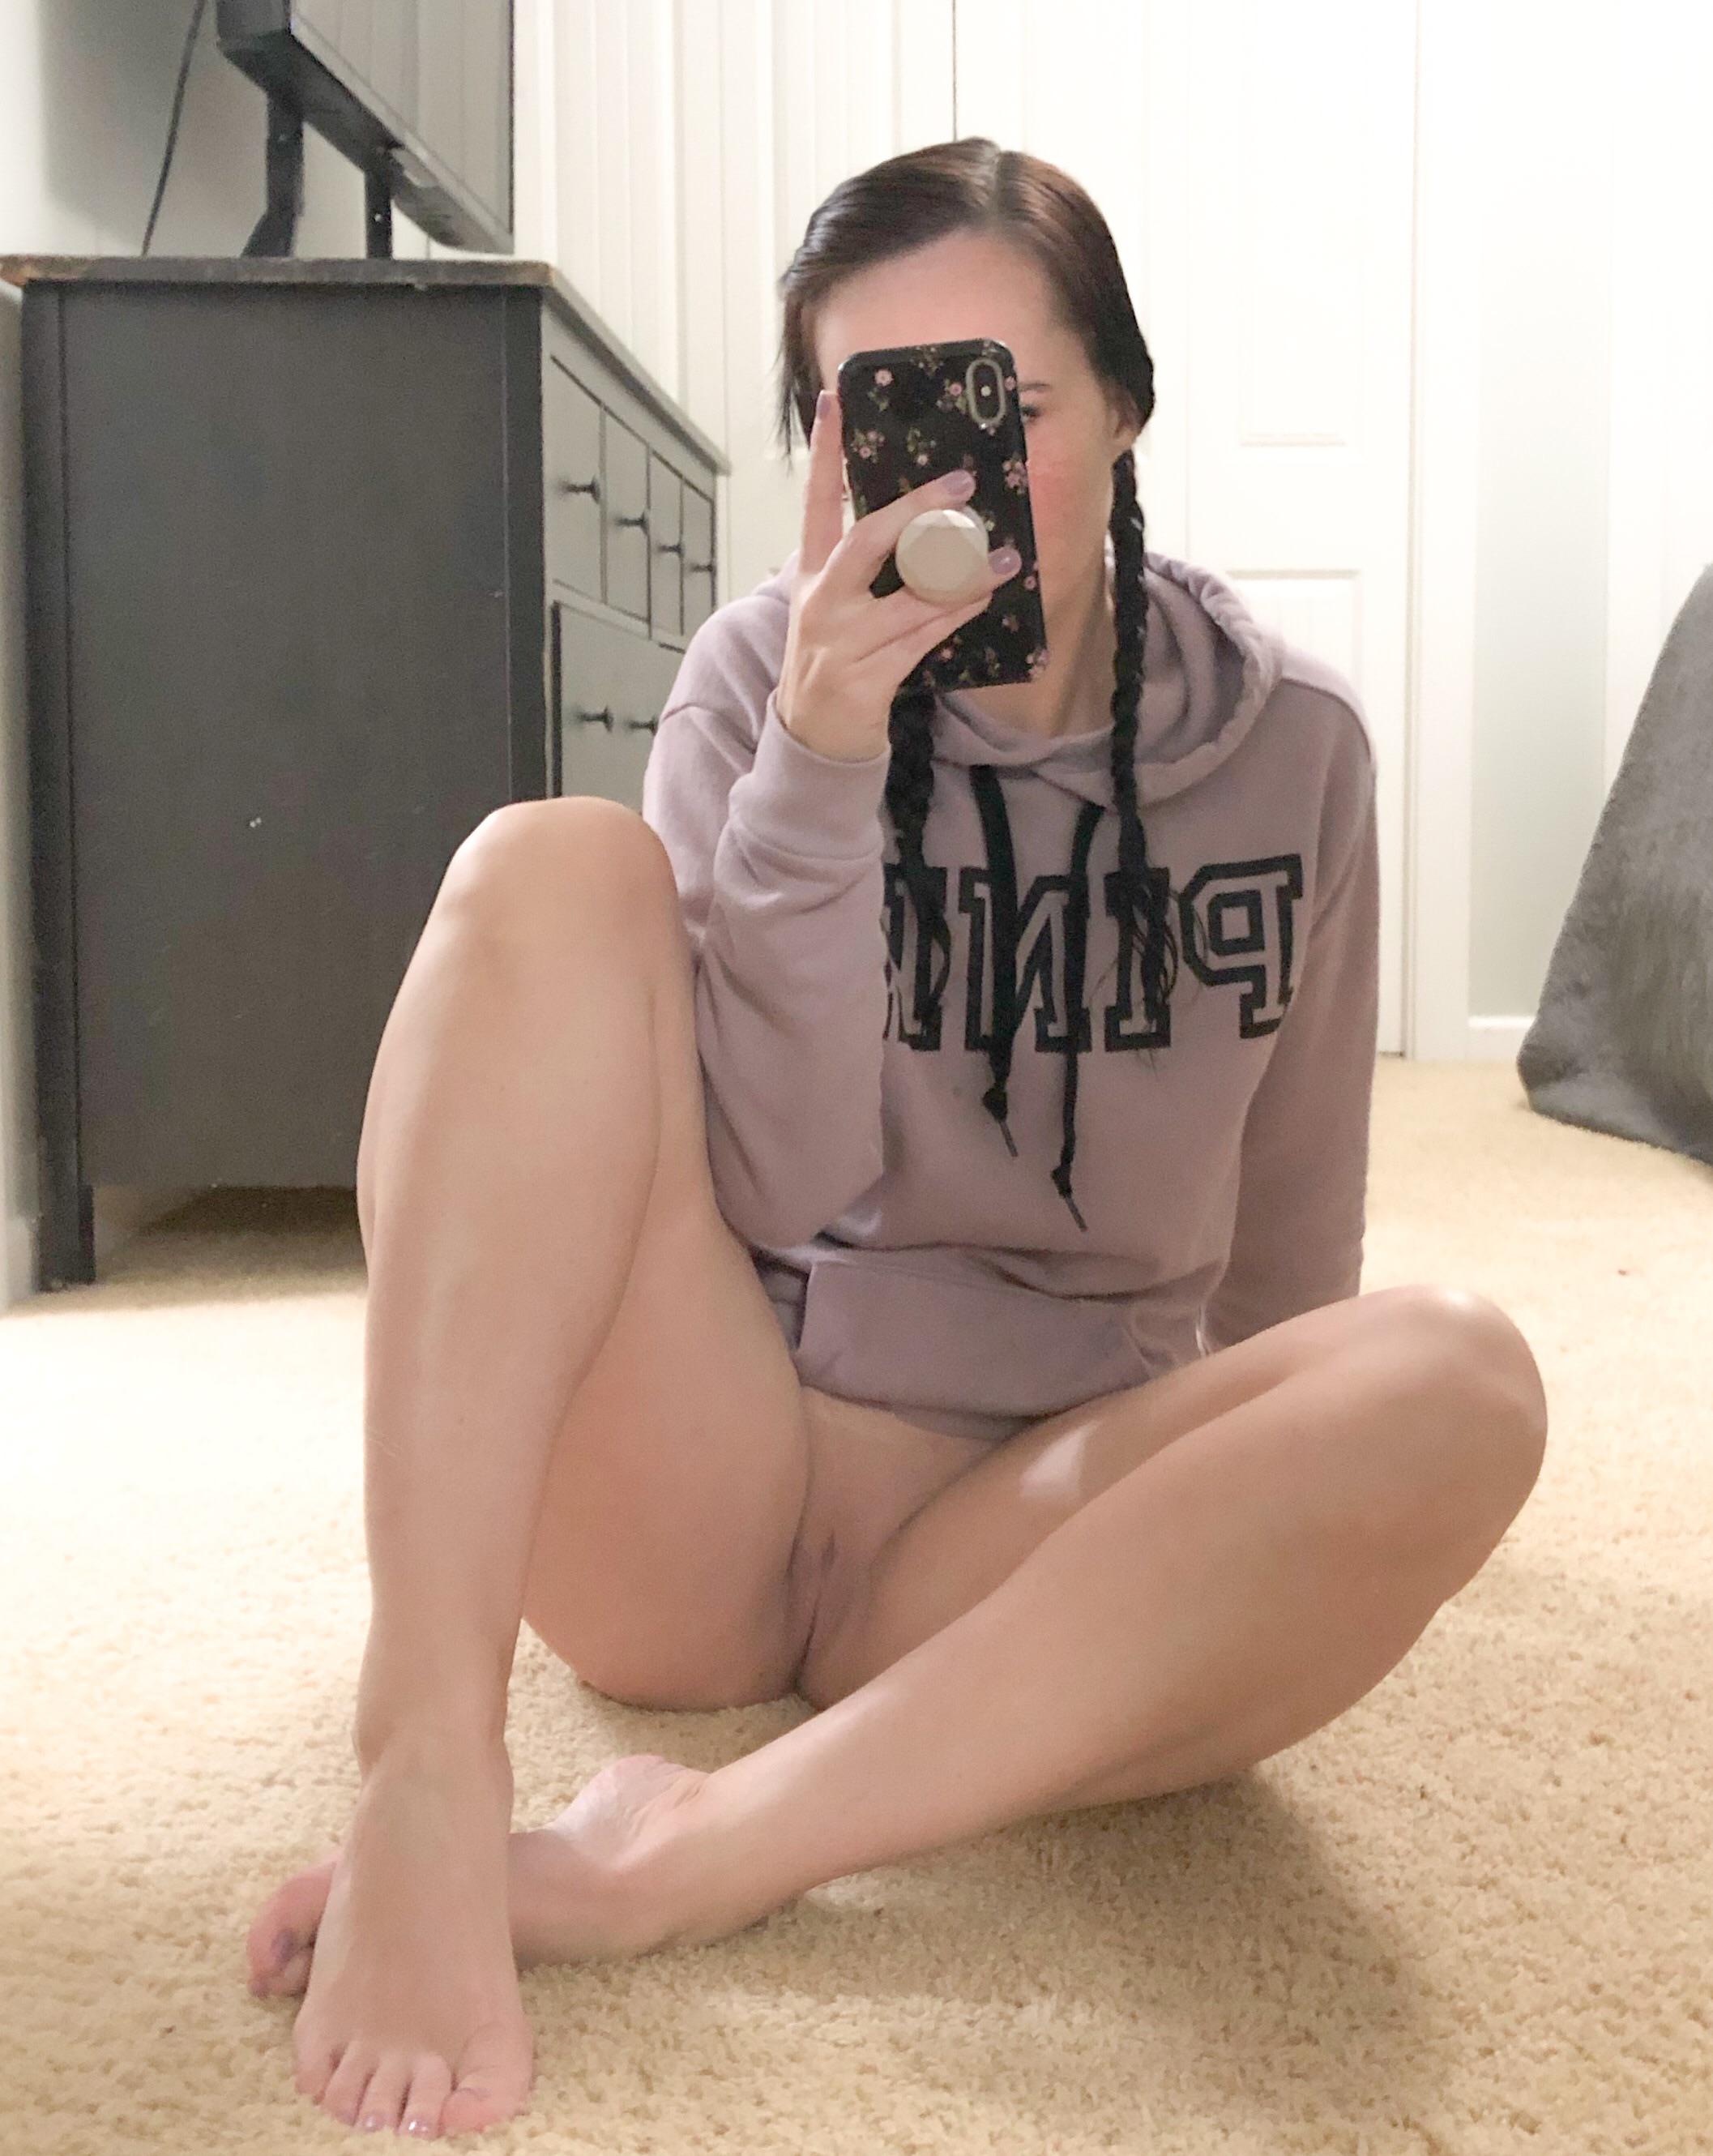 To the few online, I wanted to show you my nail polish matches my hoody ️ [f]